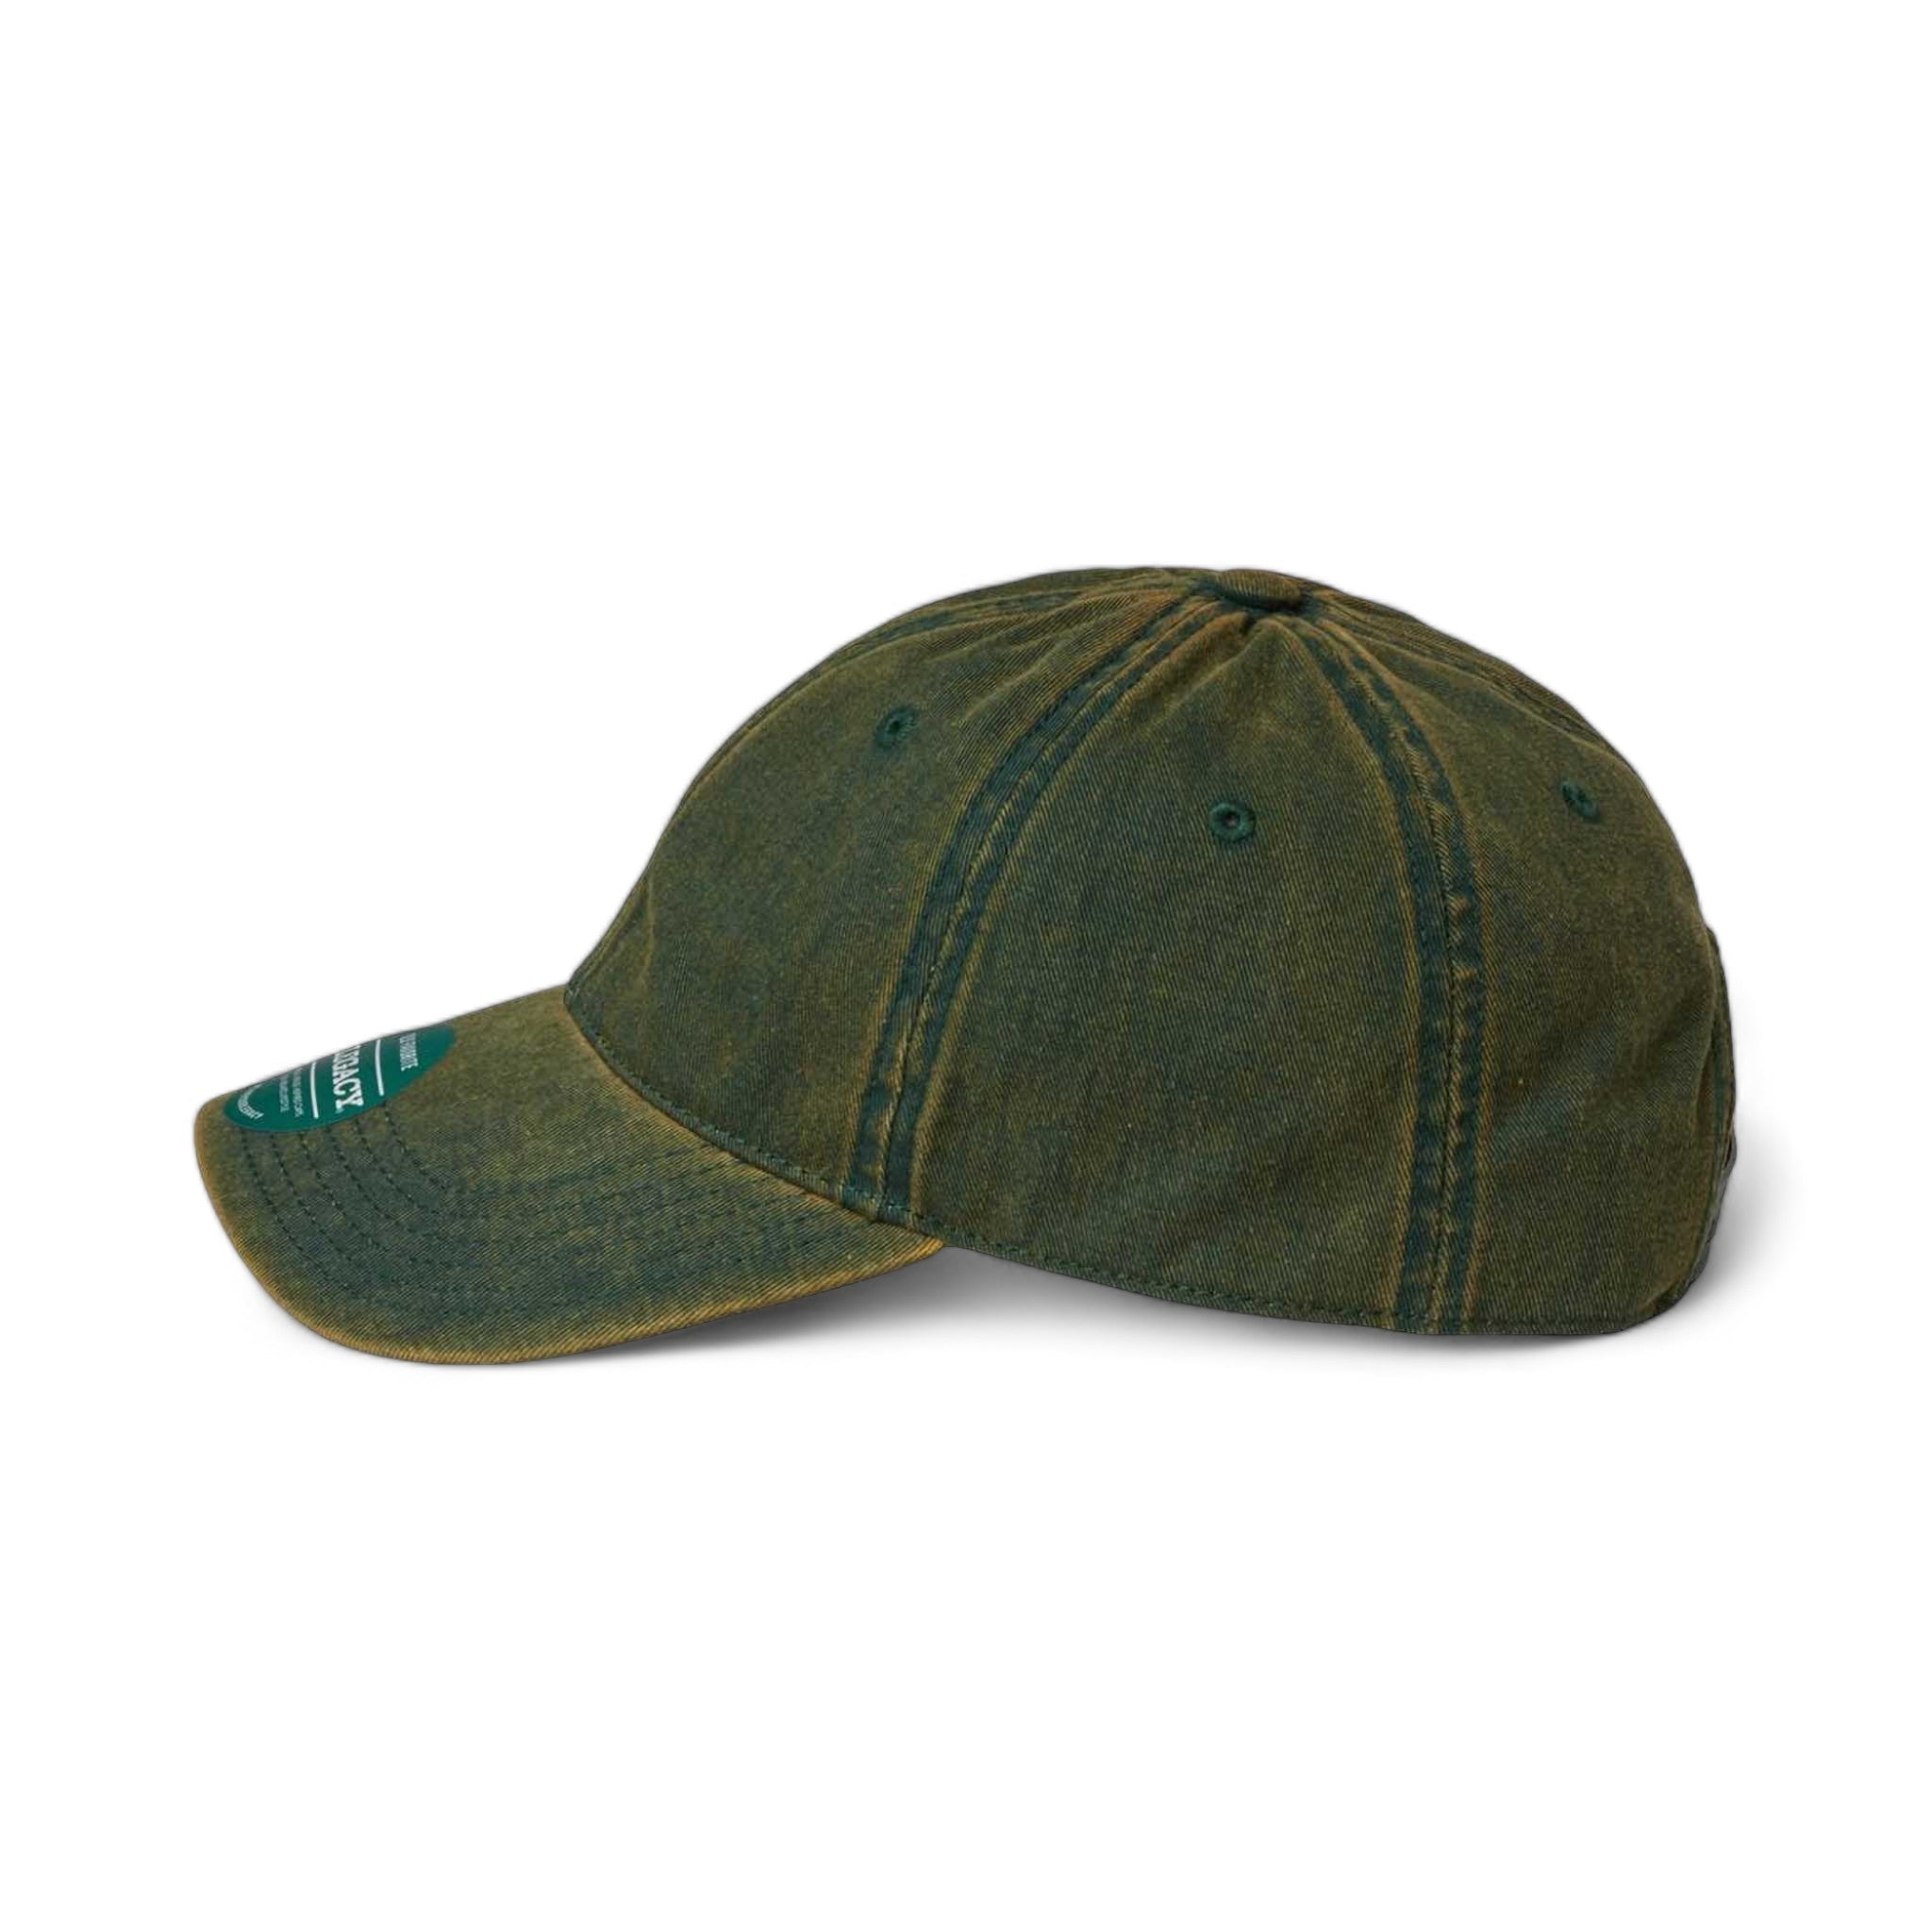 Side view of LEGACY OFAST custom hat in green